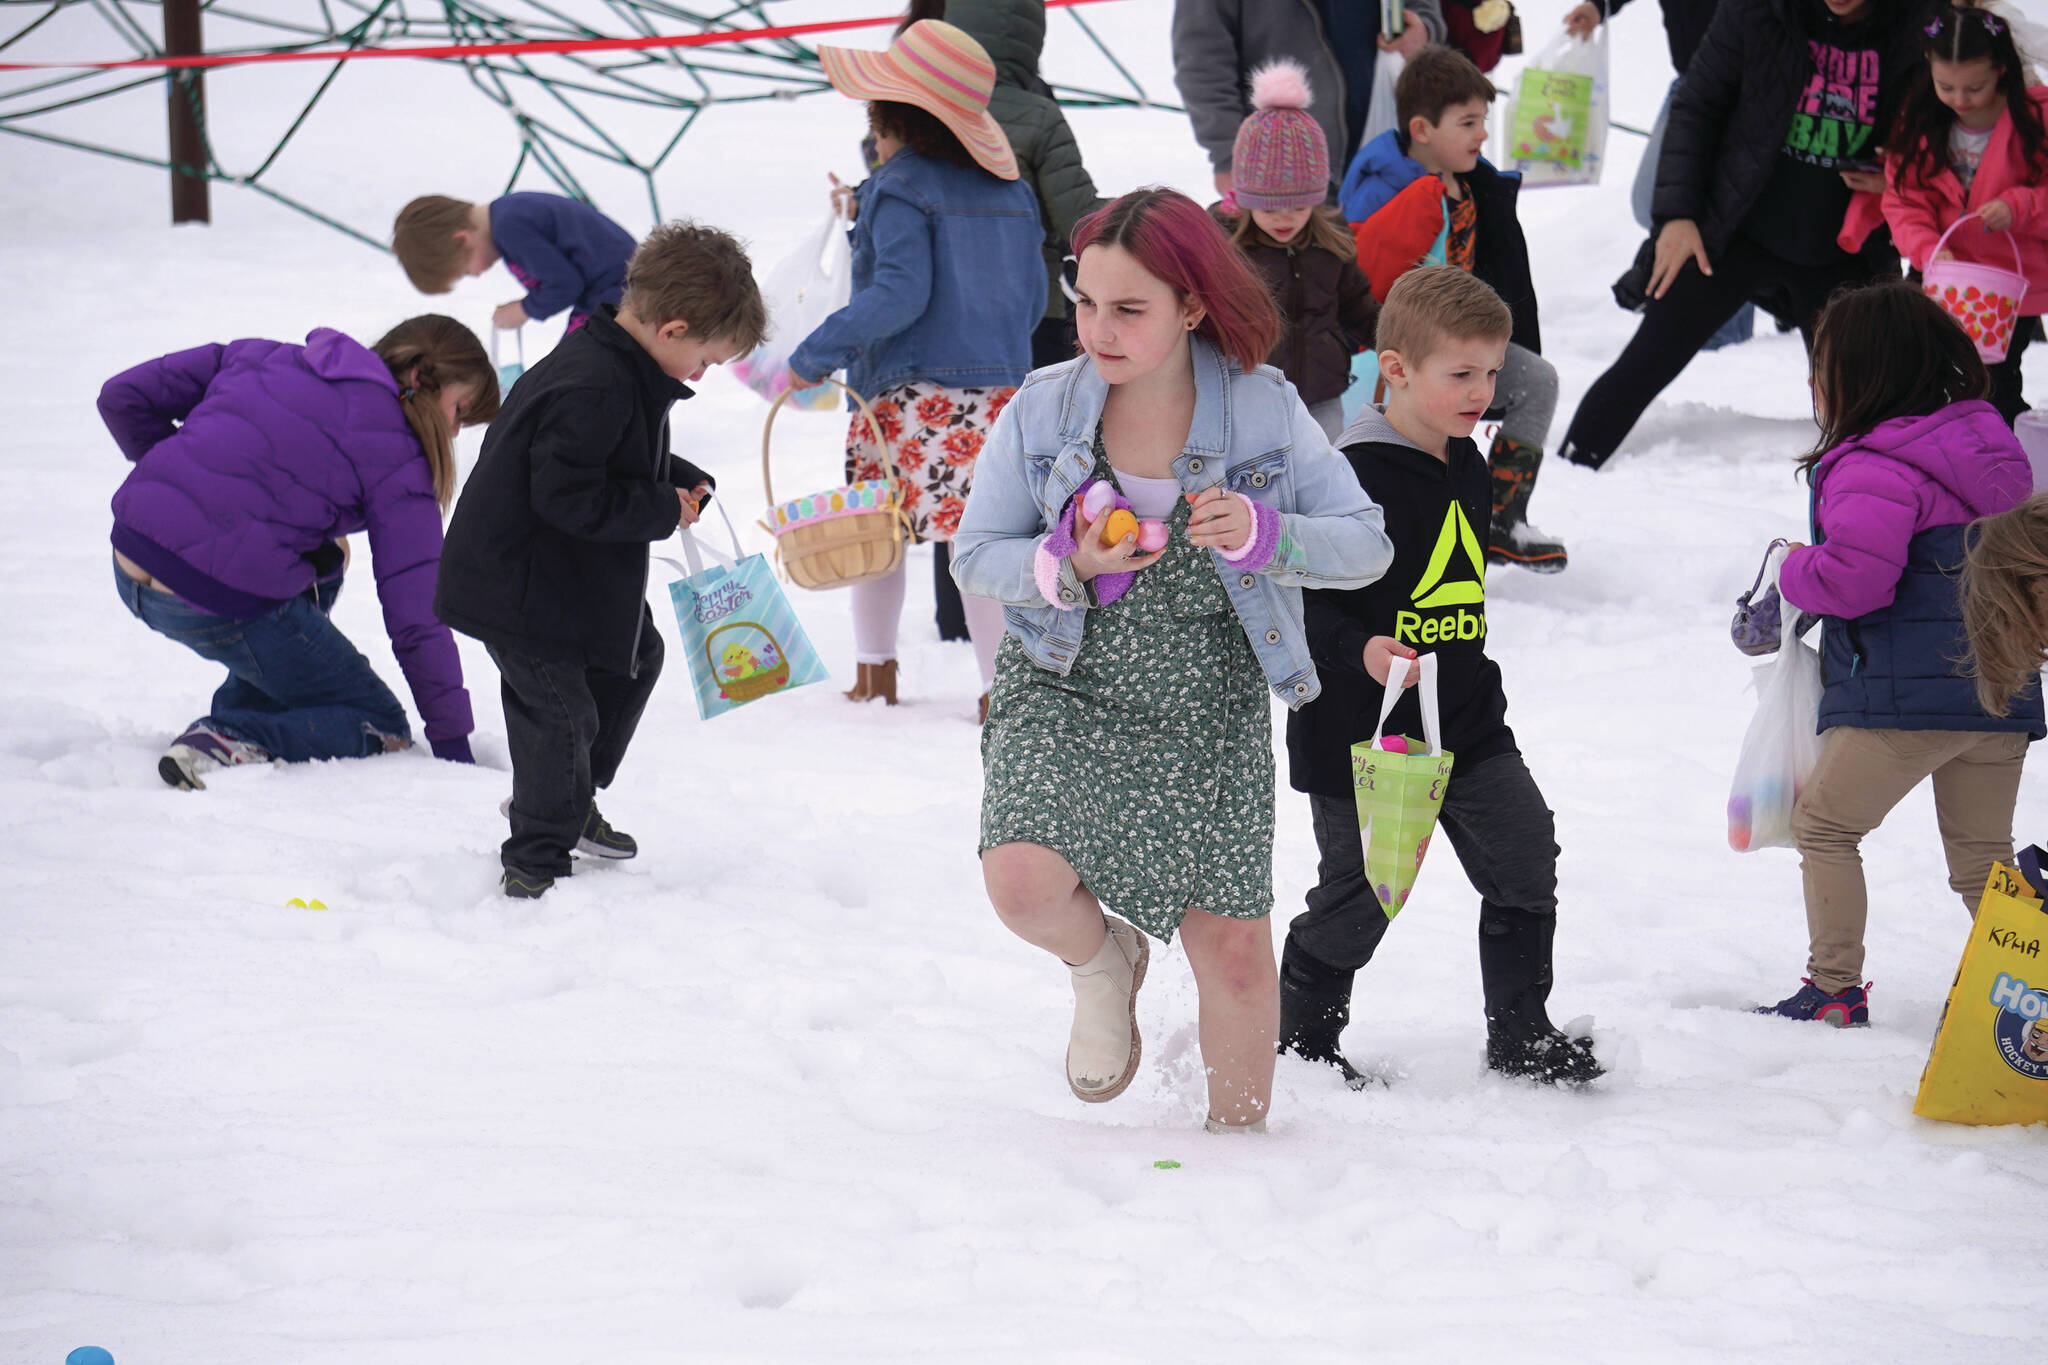 Jake Dye/Peninsula Clarion
Children hunt for Easter eggs during the Easter Eggstravaganza at Nikiski Community Recreation Center on Saturday.